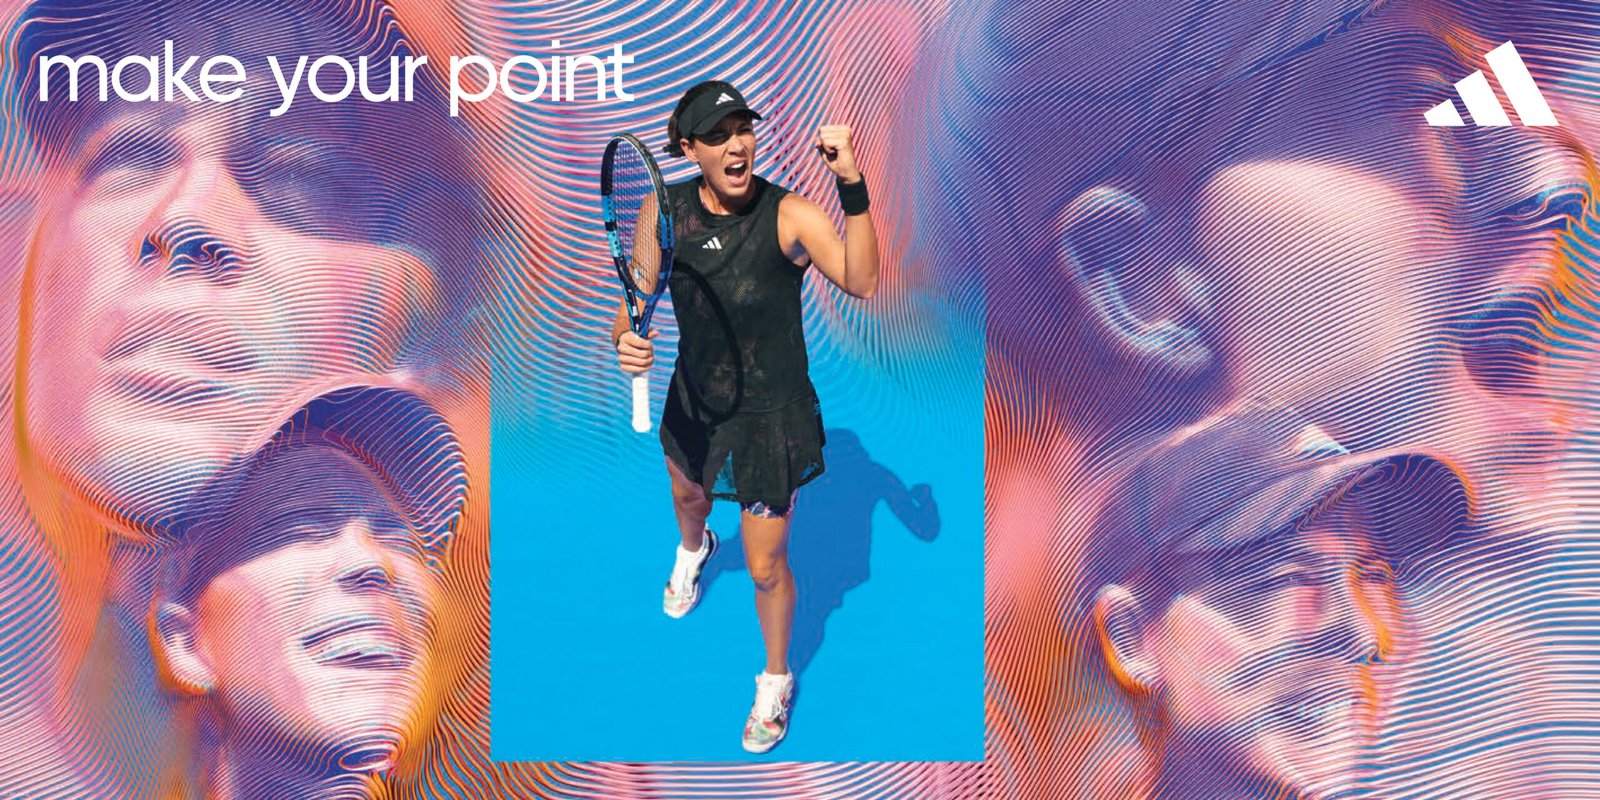 ADIDAS INTRODUCES THE NEW SS23 MELBOURNE TENNIS COLLECTION DESIGNED TO REVIEW MATERIALS AND IMPROVE PERFORMANCE © Copyright PLPG GLOBAL MEDIA 2023